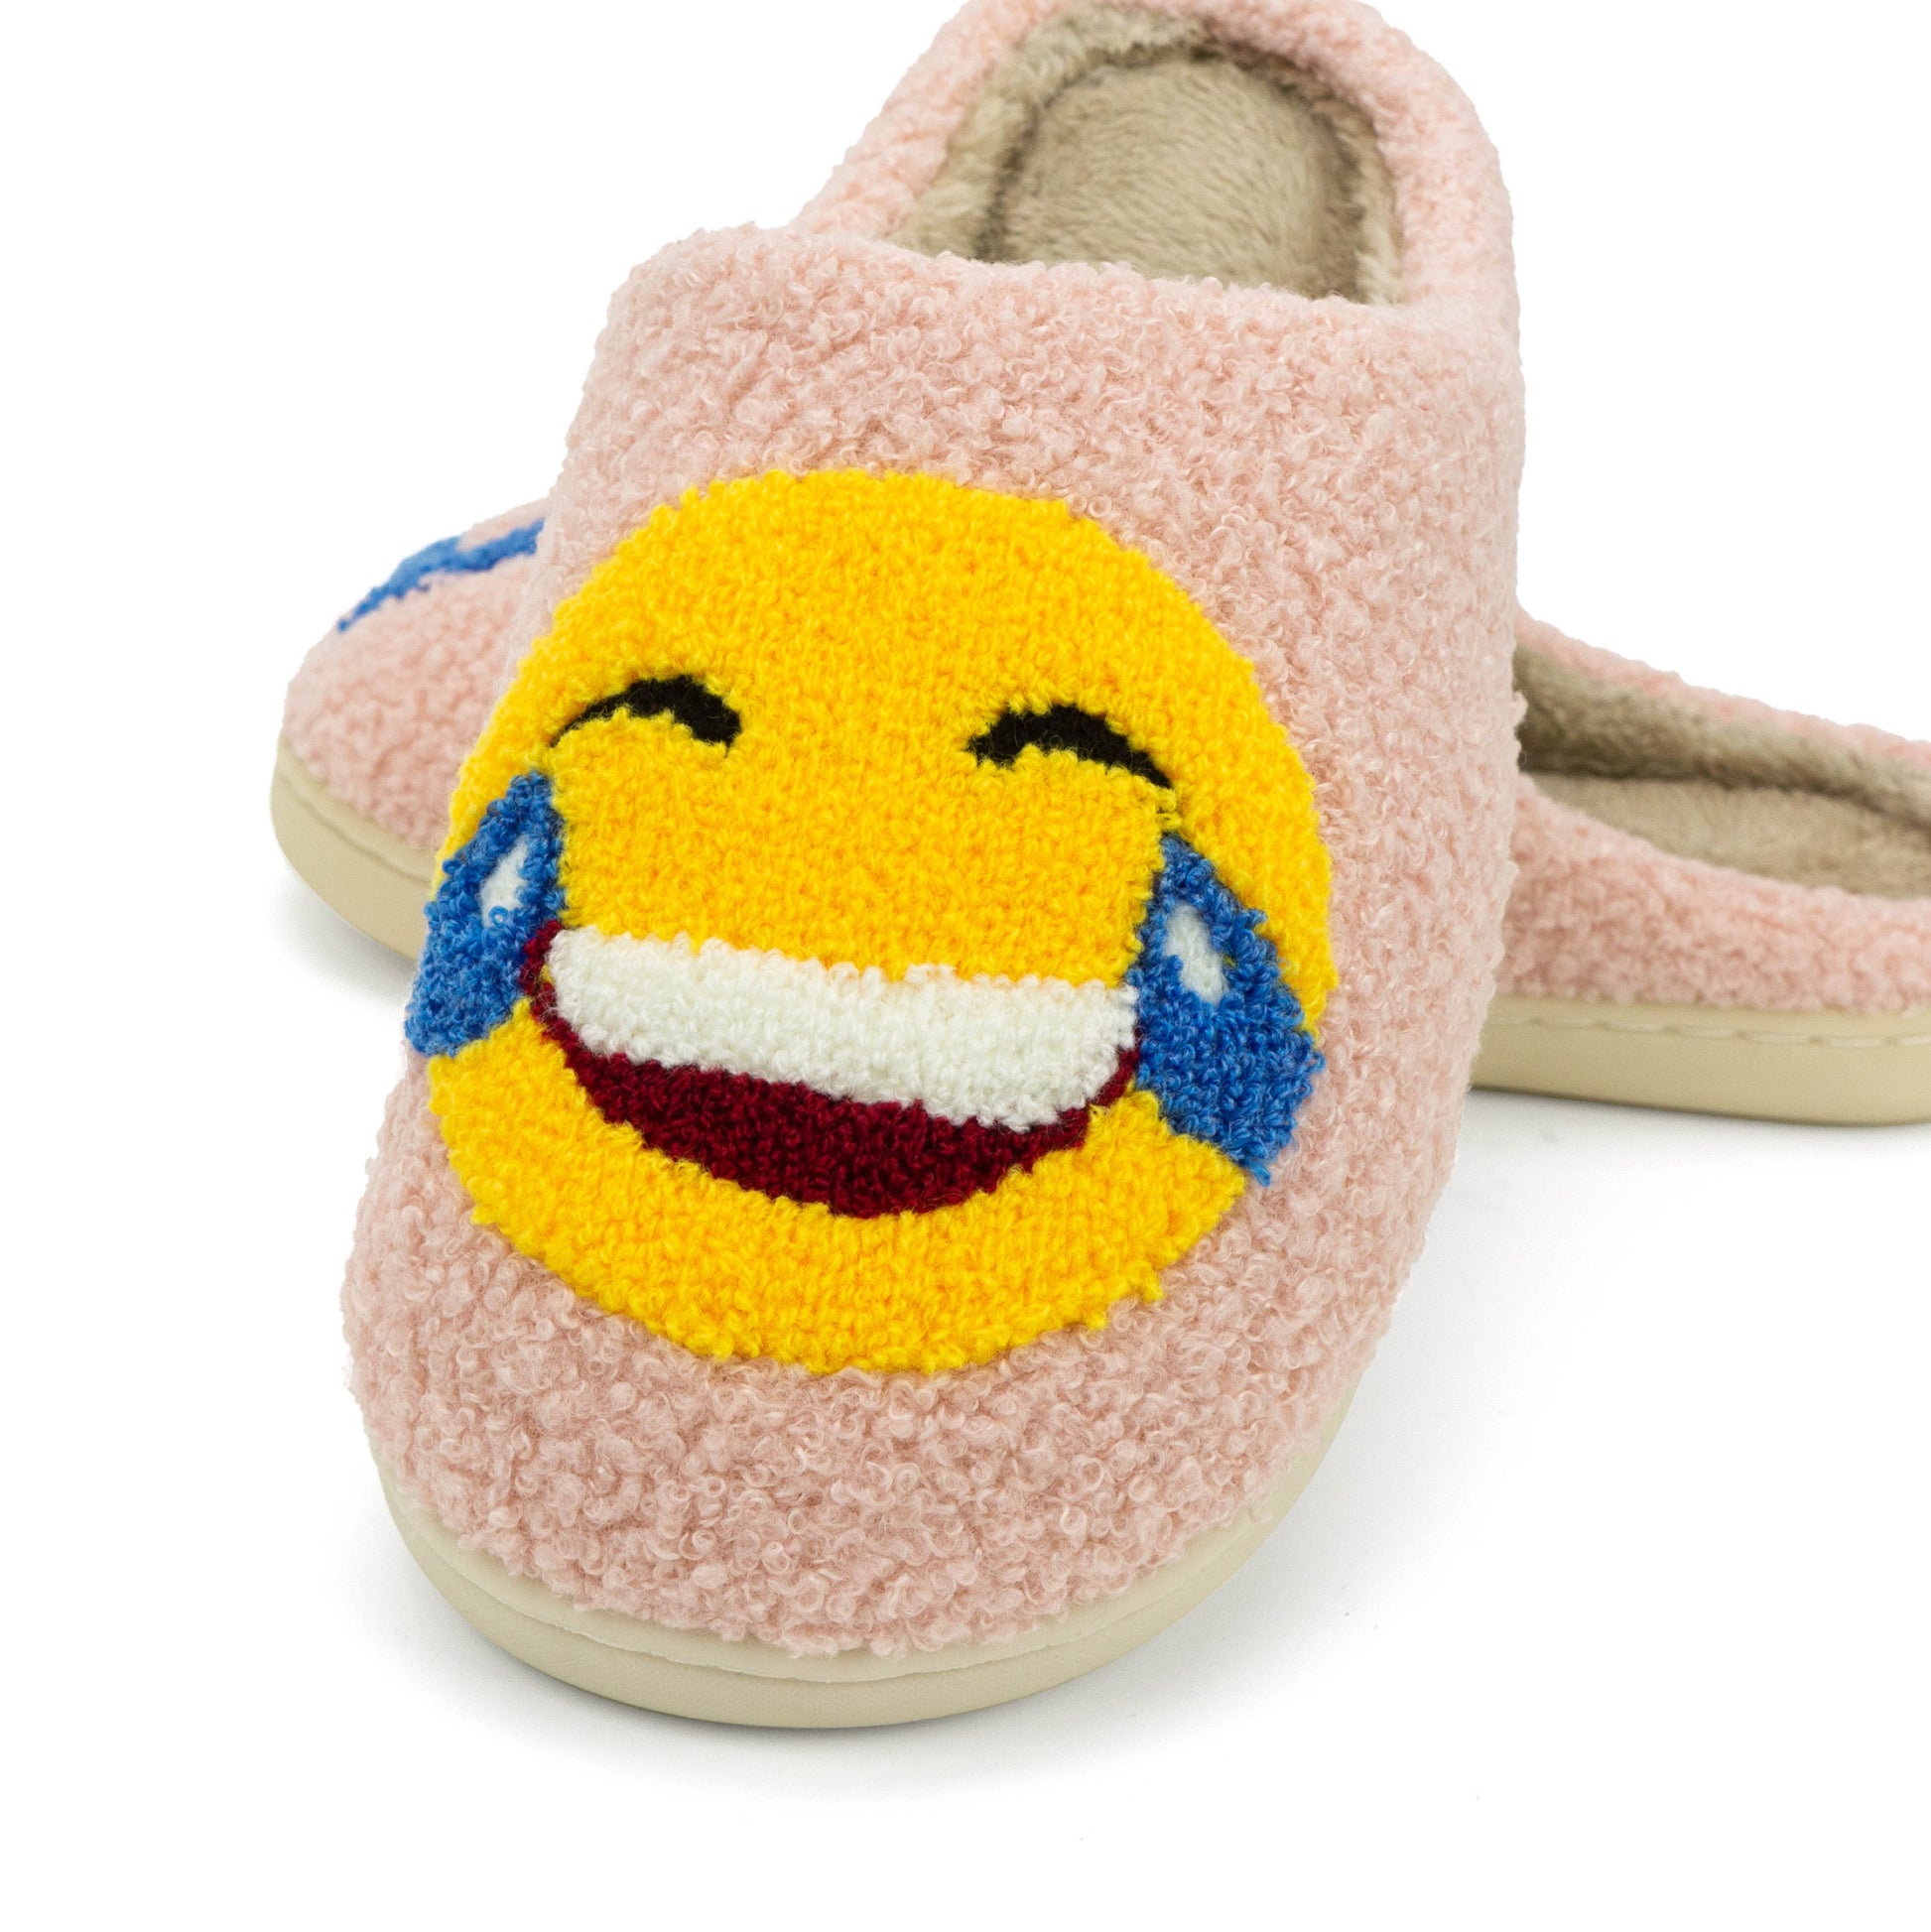 Smiley Slippers The Perfect Footwear for Cheerful Little Feet